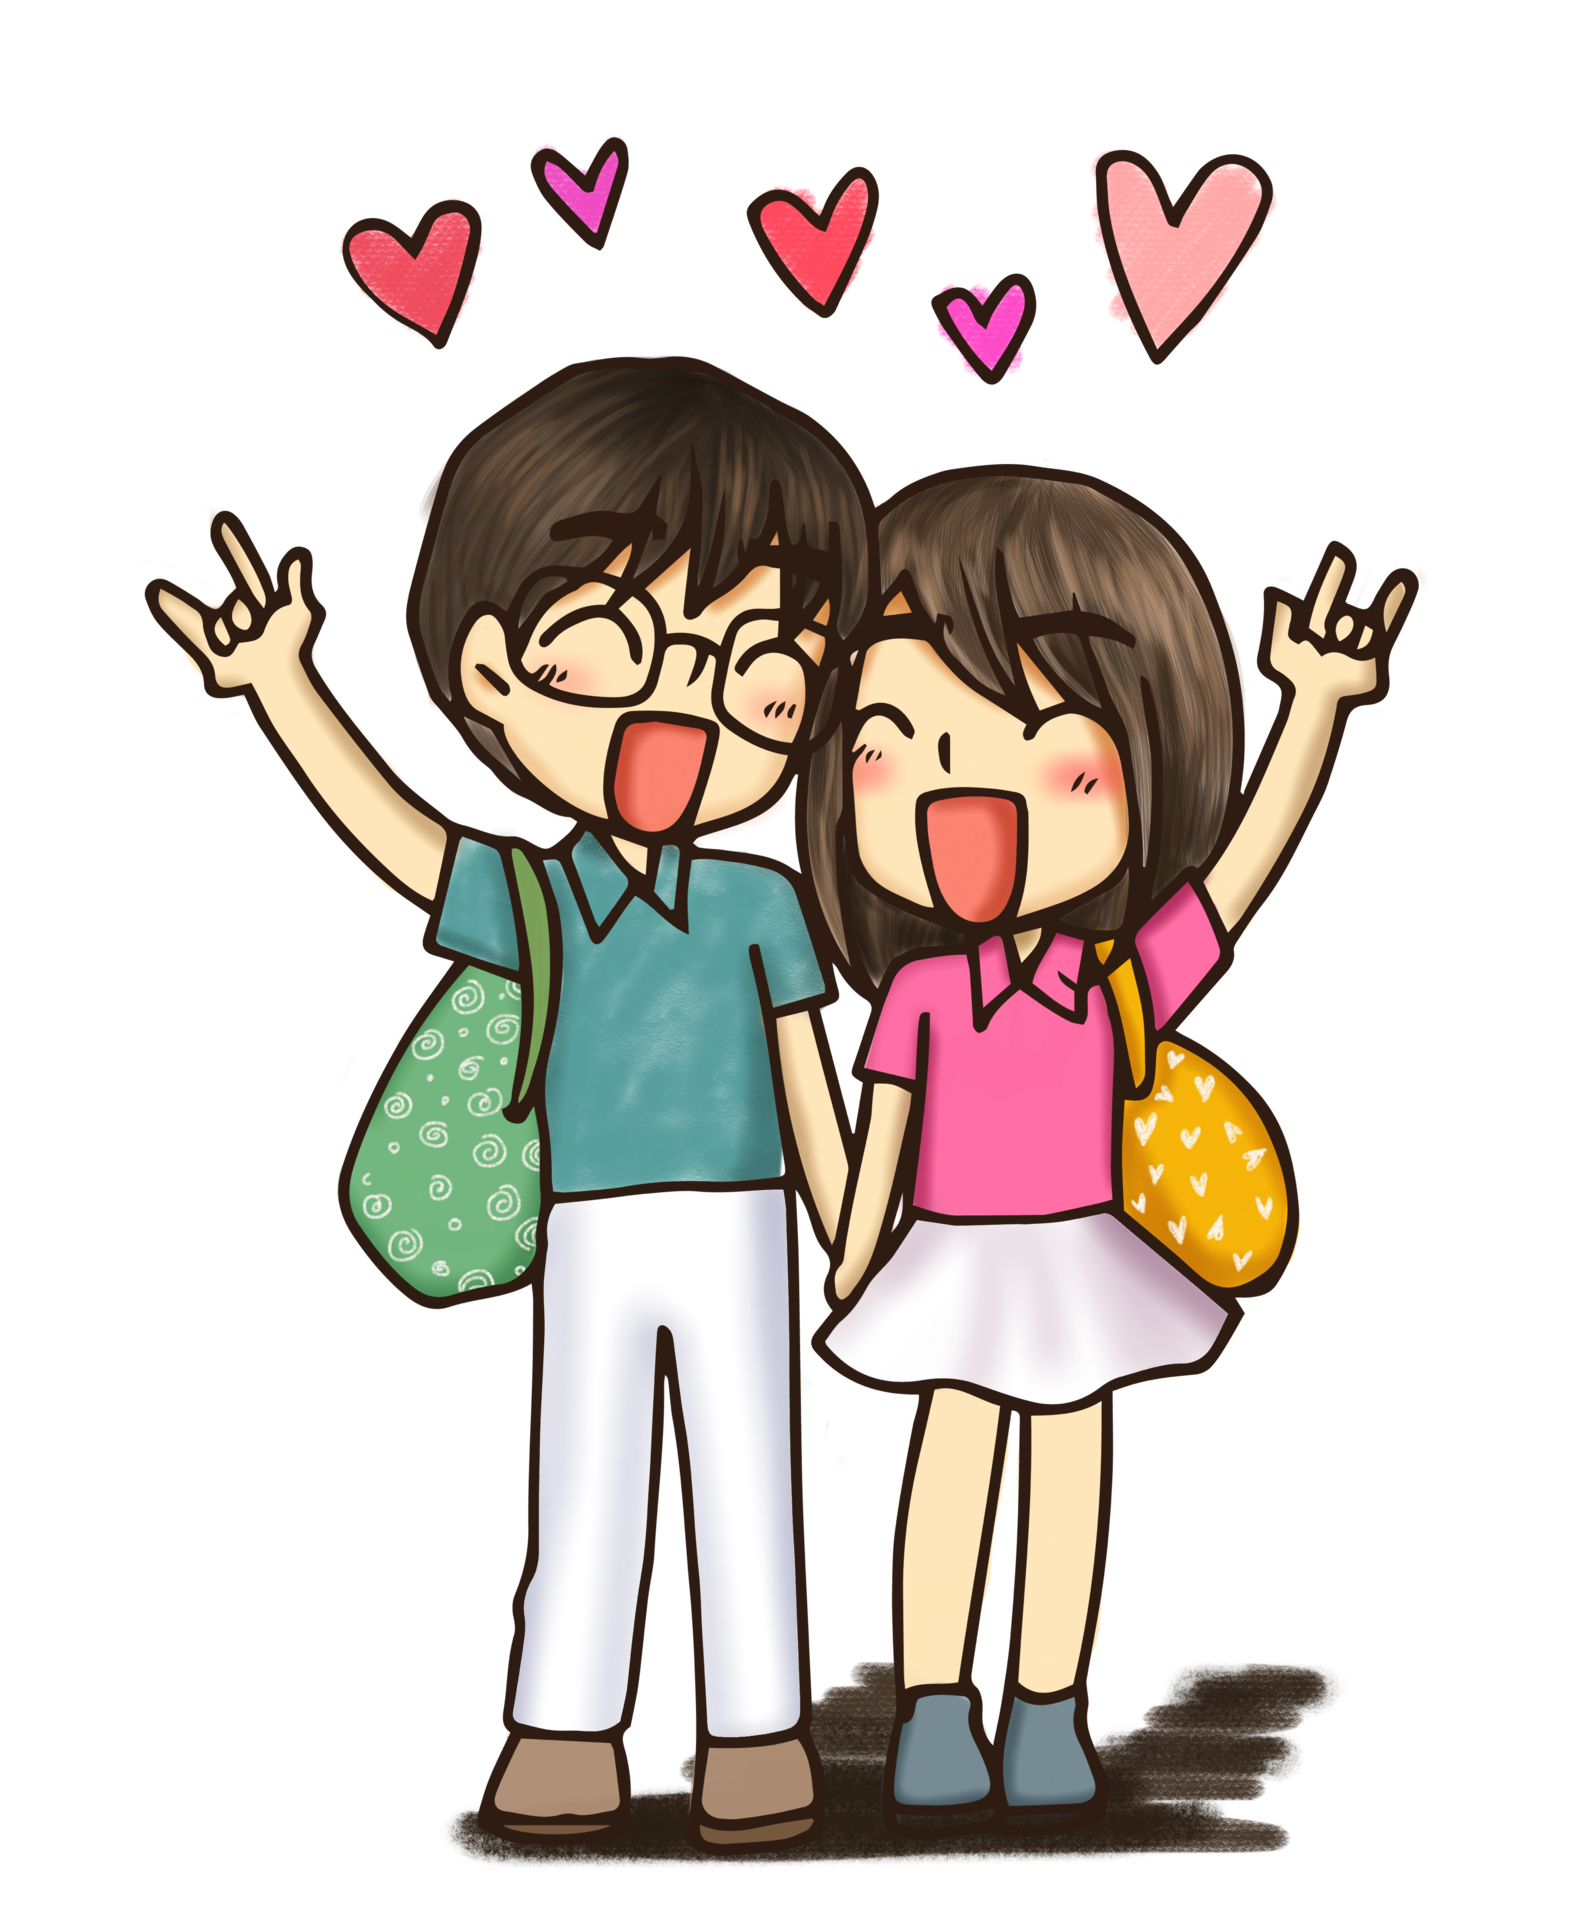 Free Anime love couples together travel Cute Character Cartoon Model  Emotion Illustration ClipArt Drawing Kawaii Manga Design Idea Art 8470335  PNG with Transparent Background